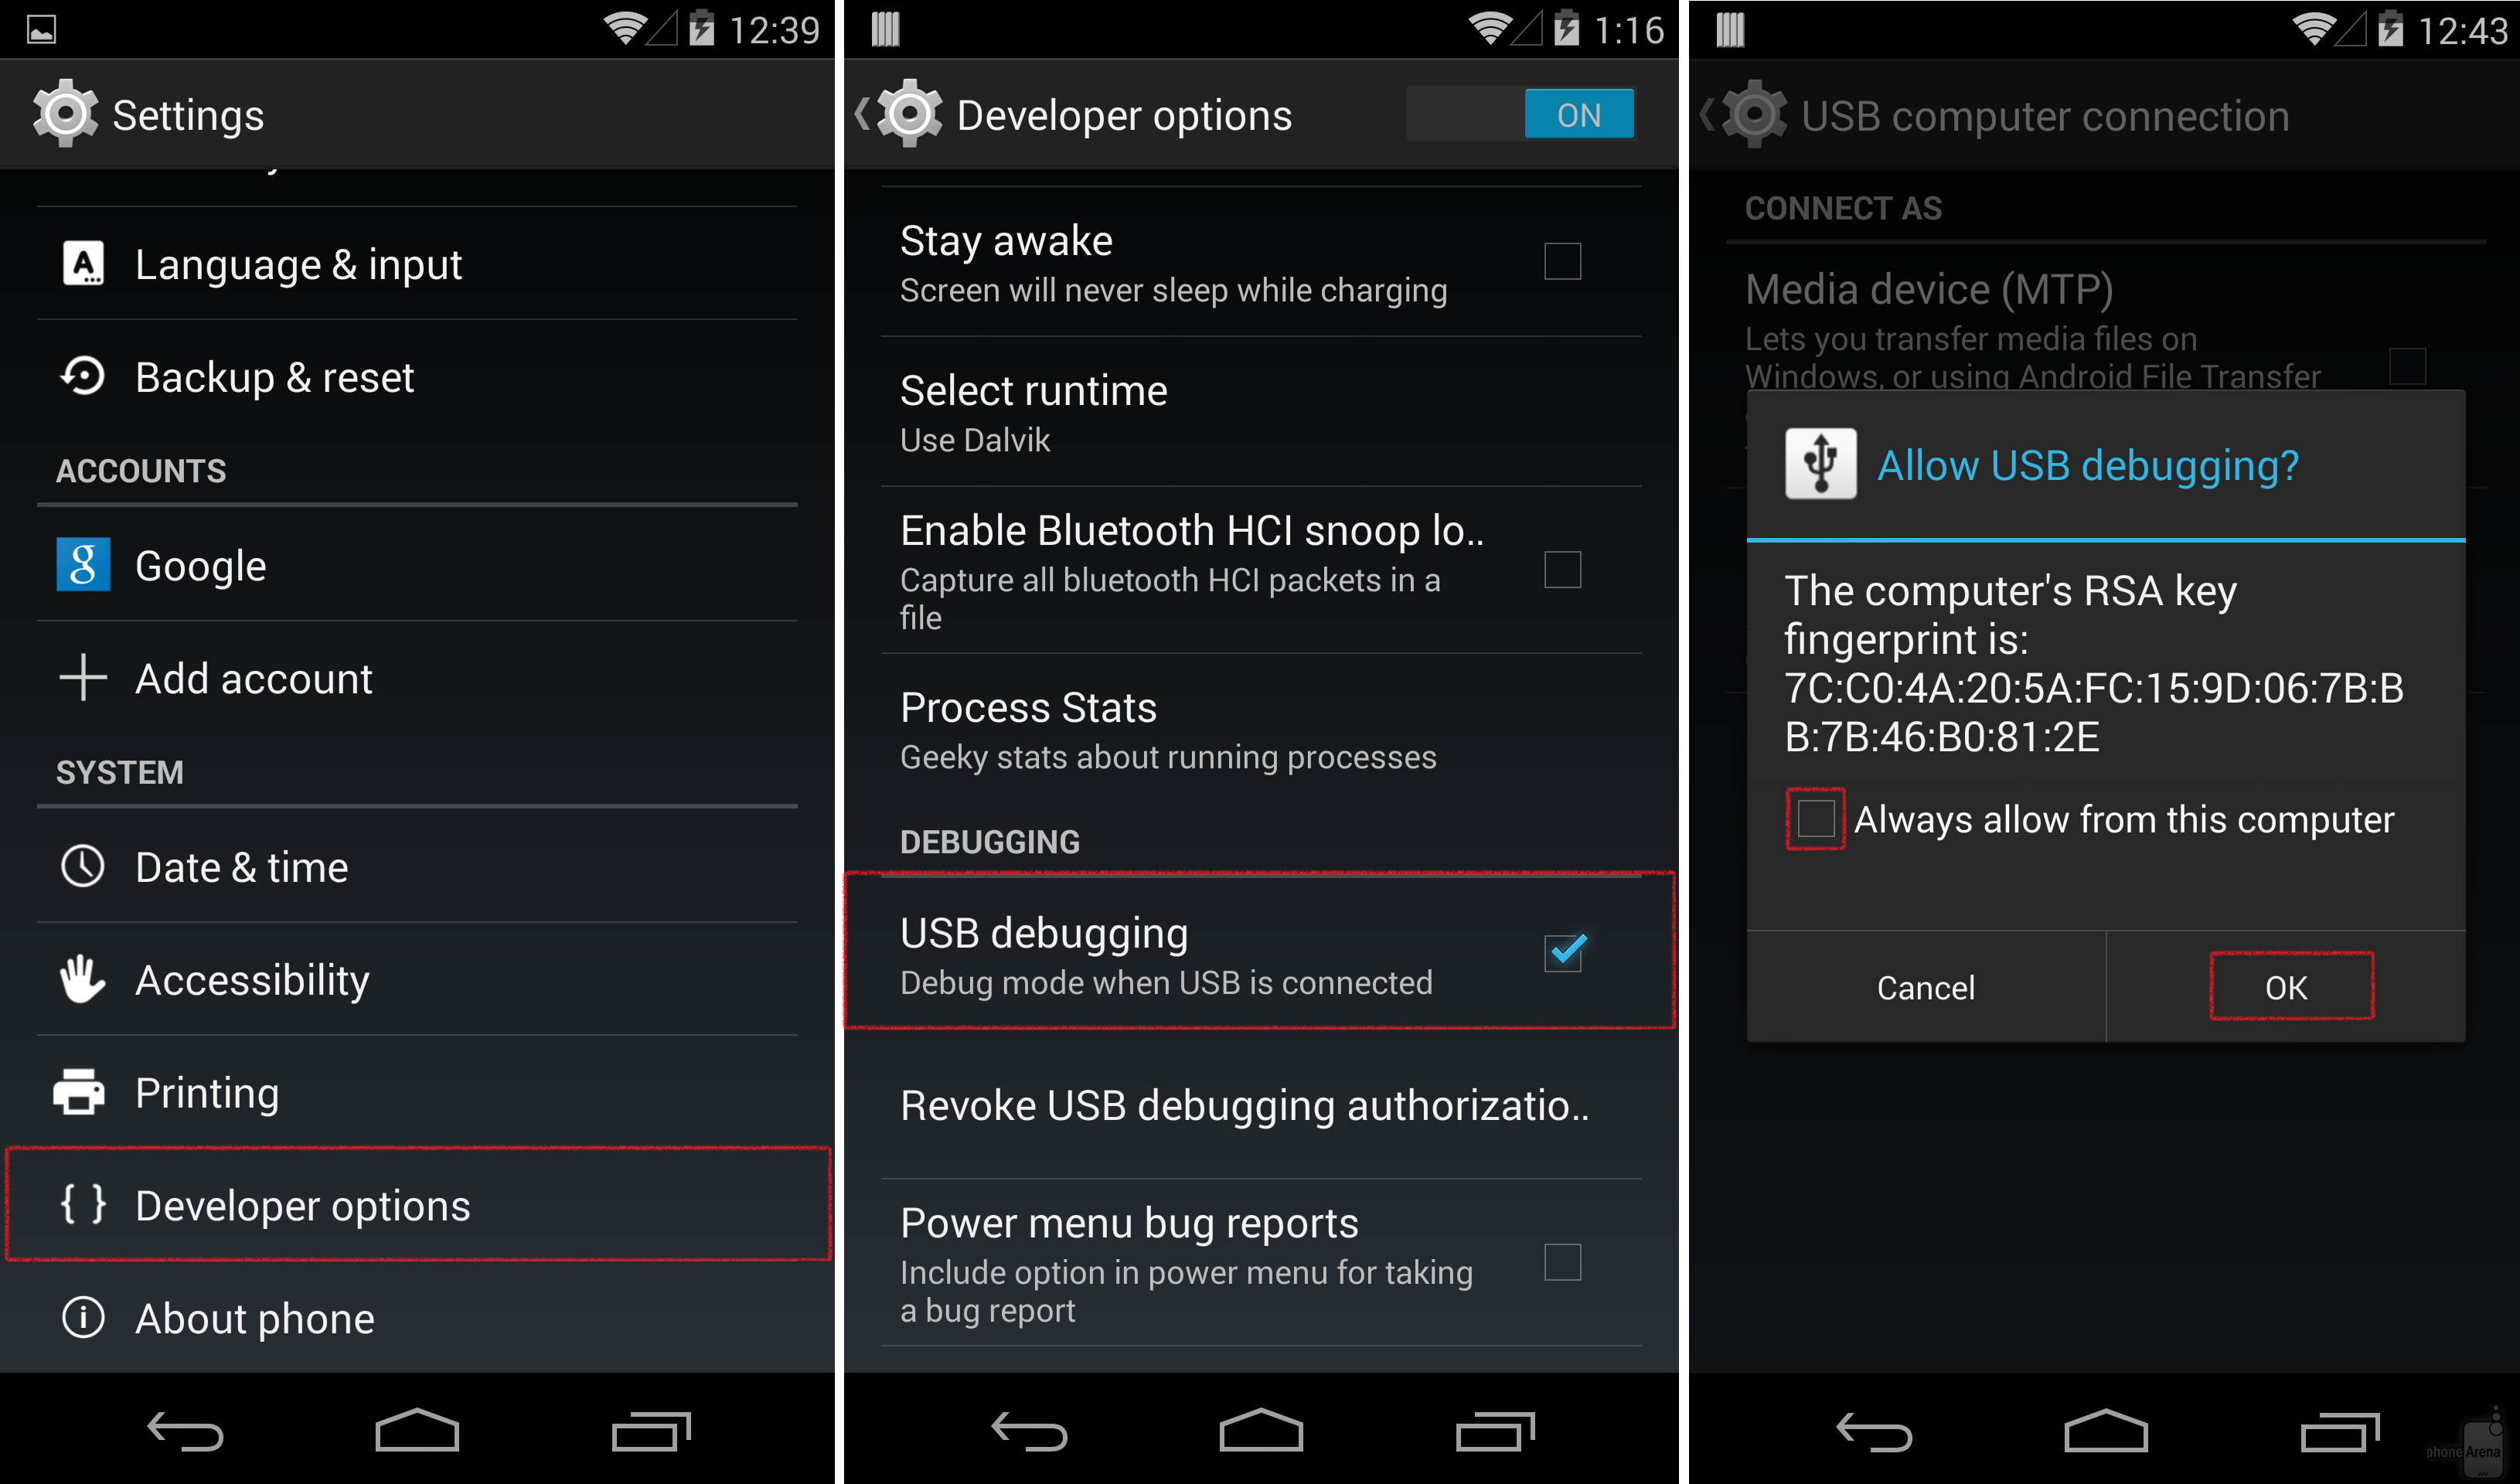 How to record your screen on Android 4.4 KitKat